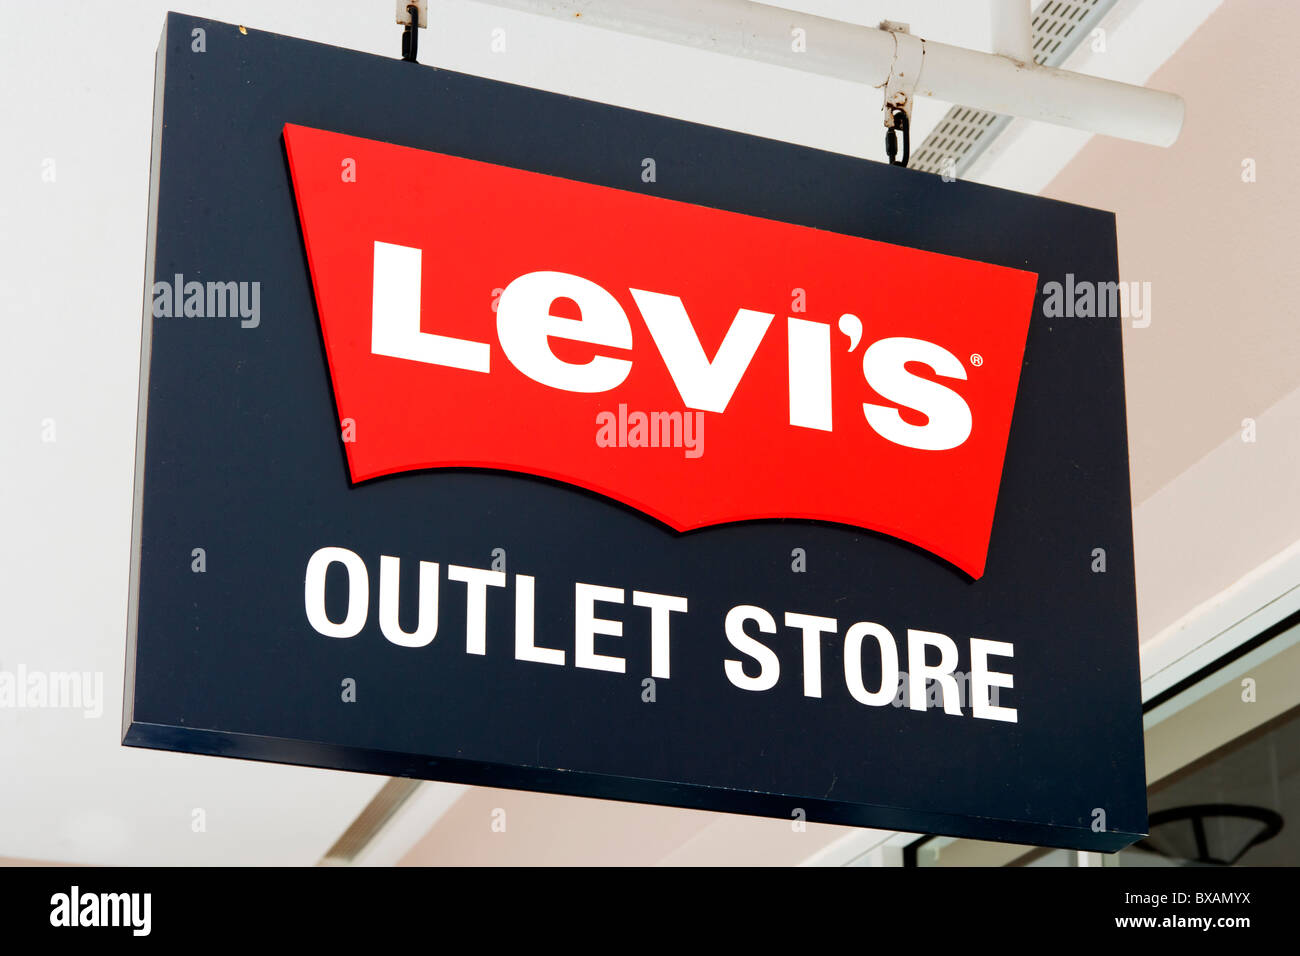 Outlet Store Stock Photos & Outlet Store Stock Images - Alamy